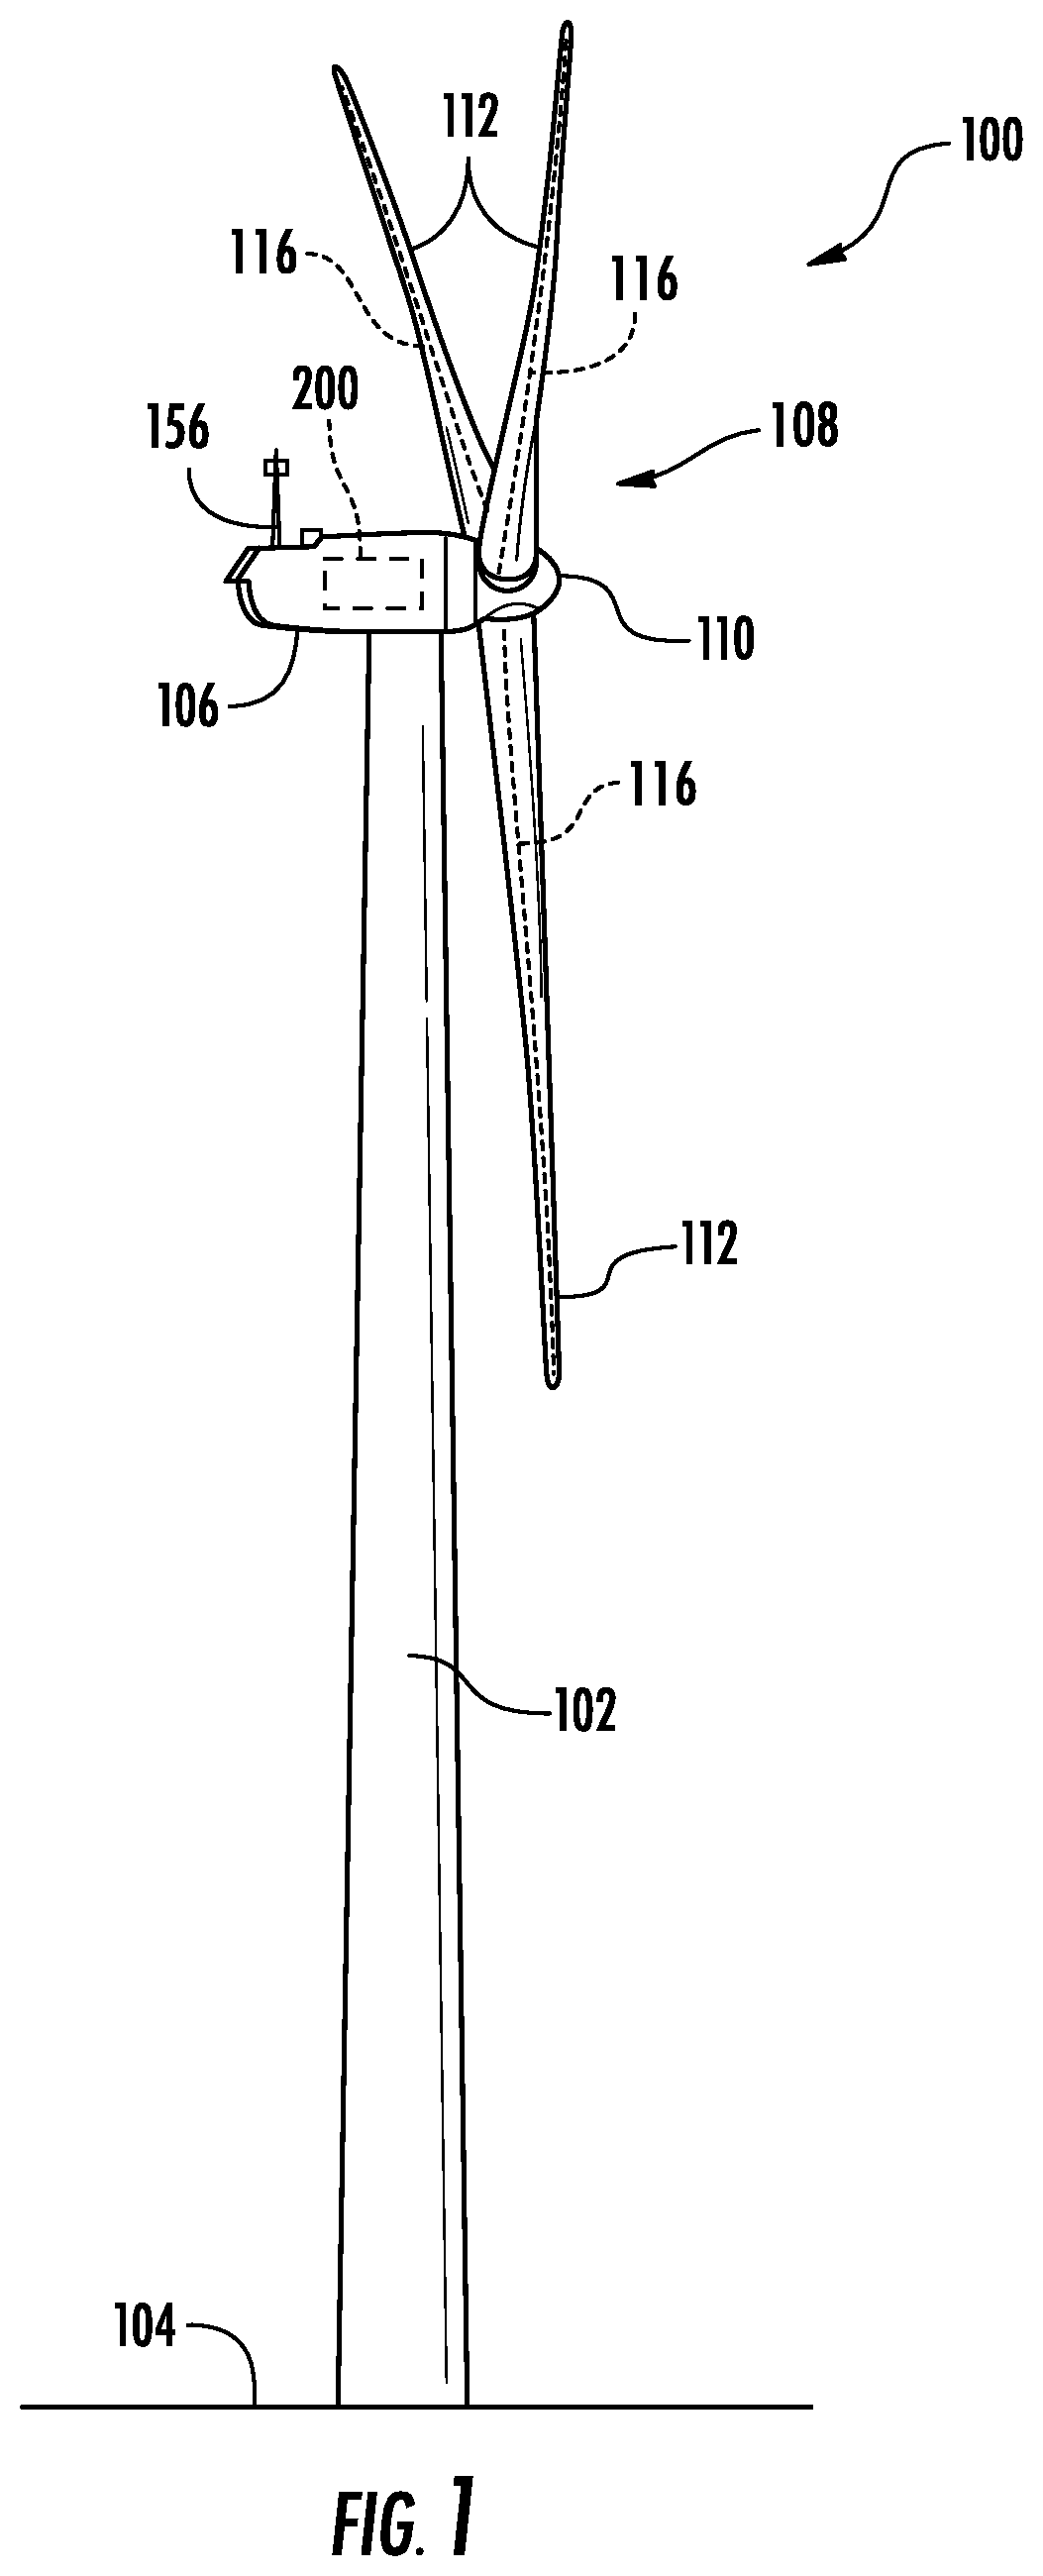 System and method for operating a wind turbine